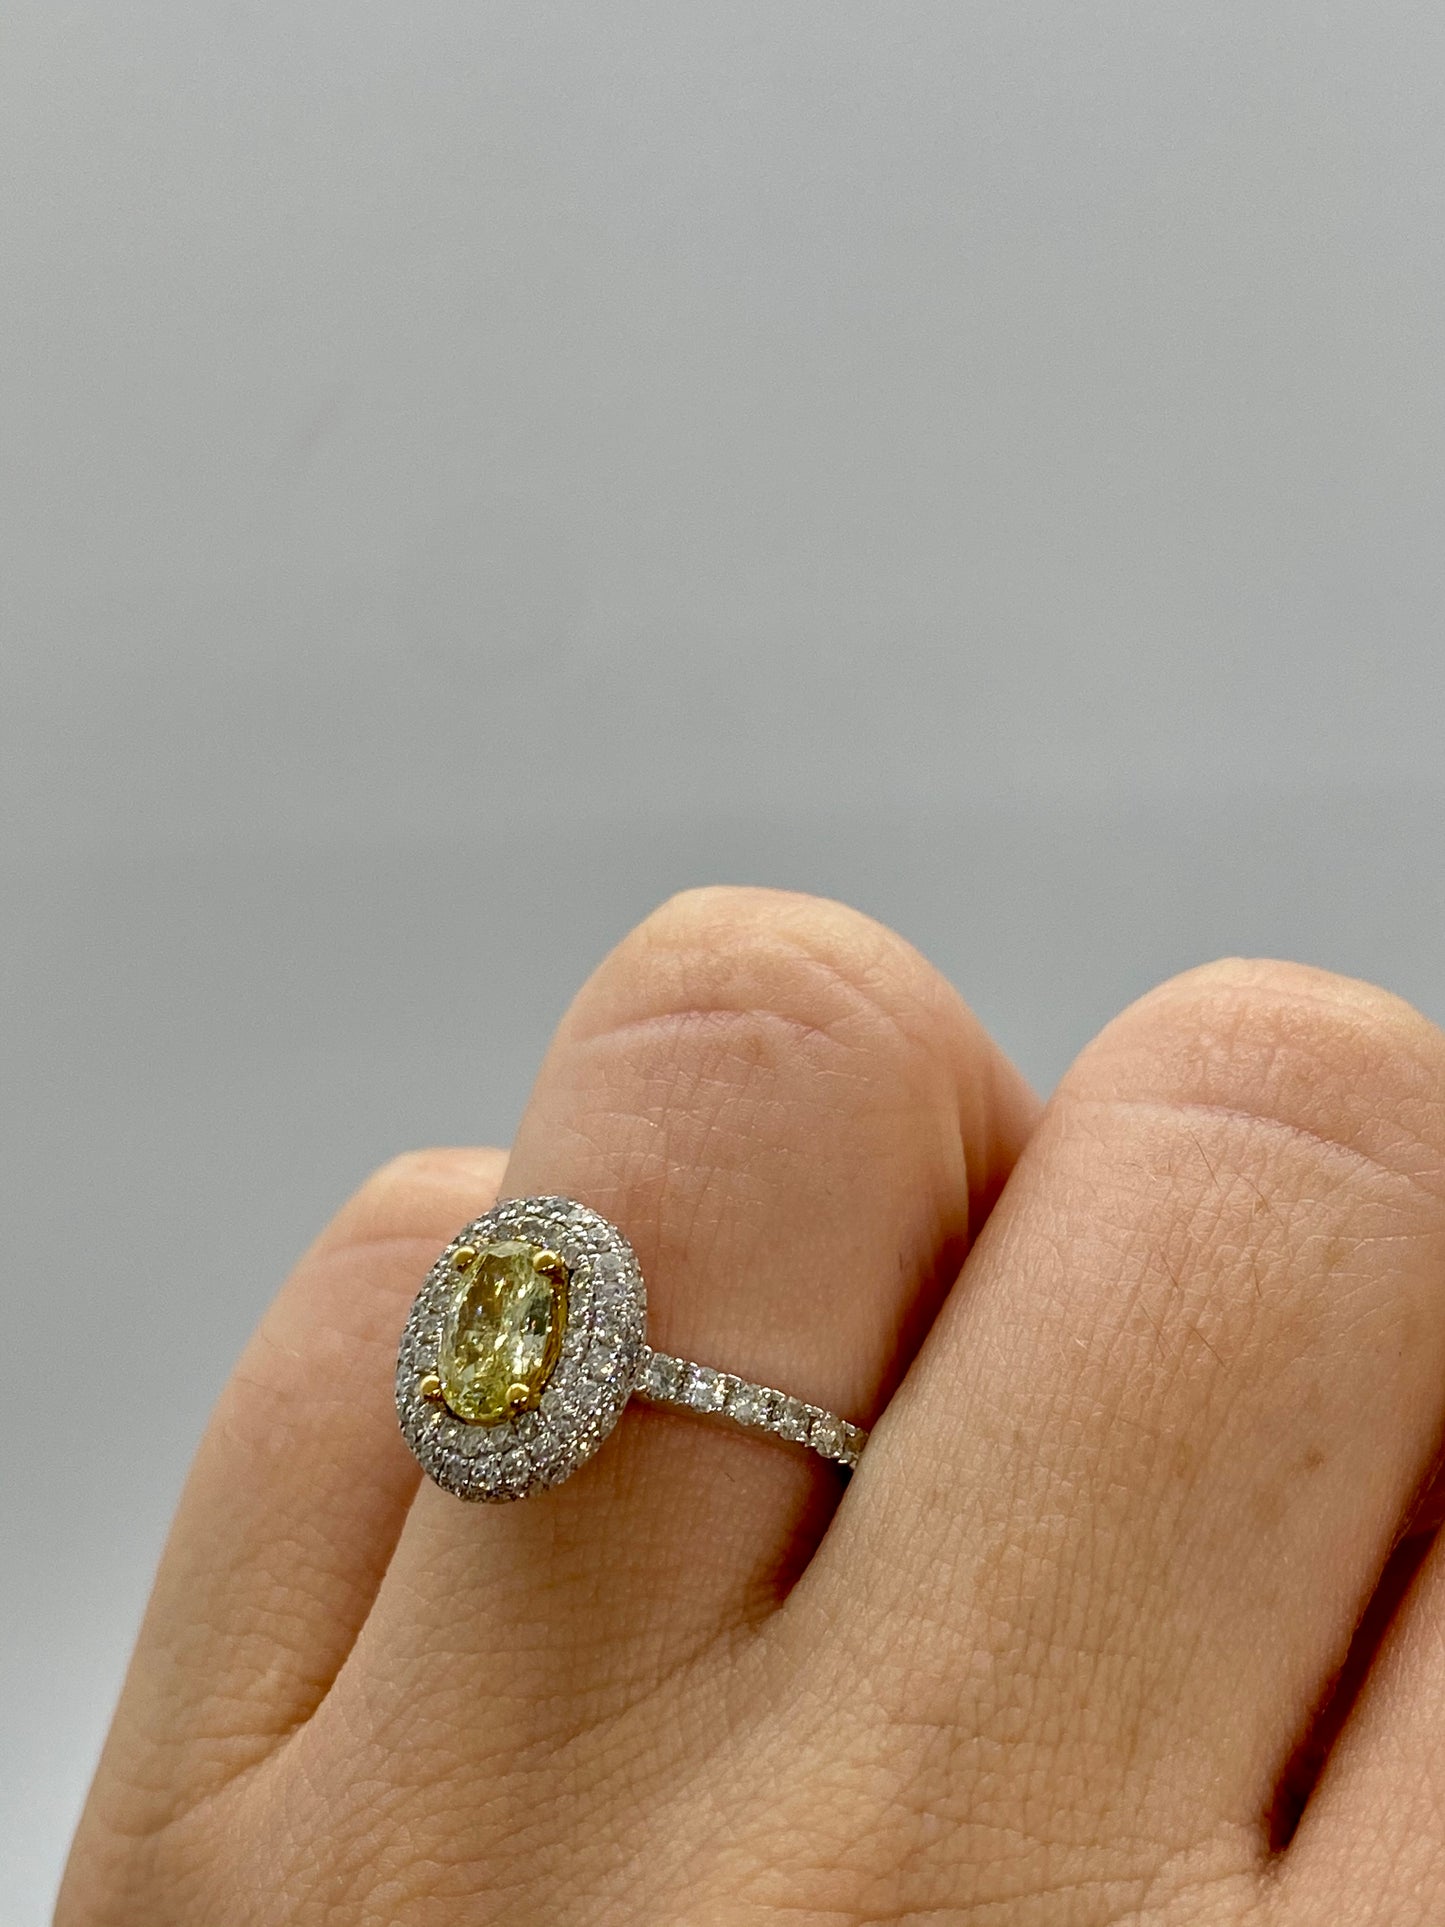 Yellow Diamond Ring R15833 - Royal Gems and Jewelry